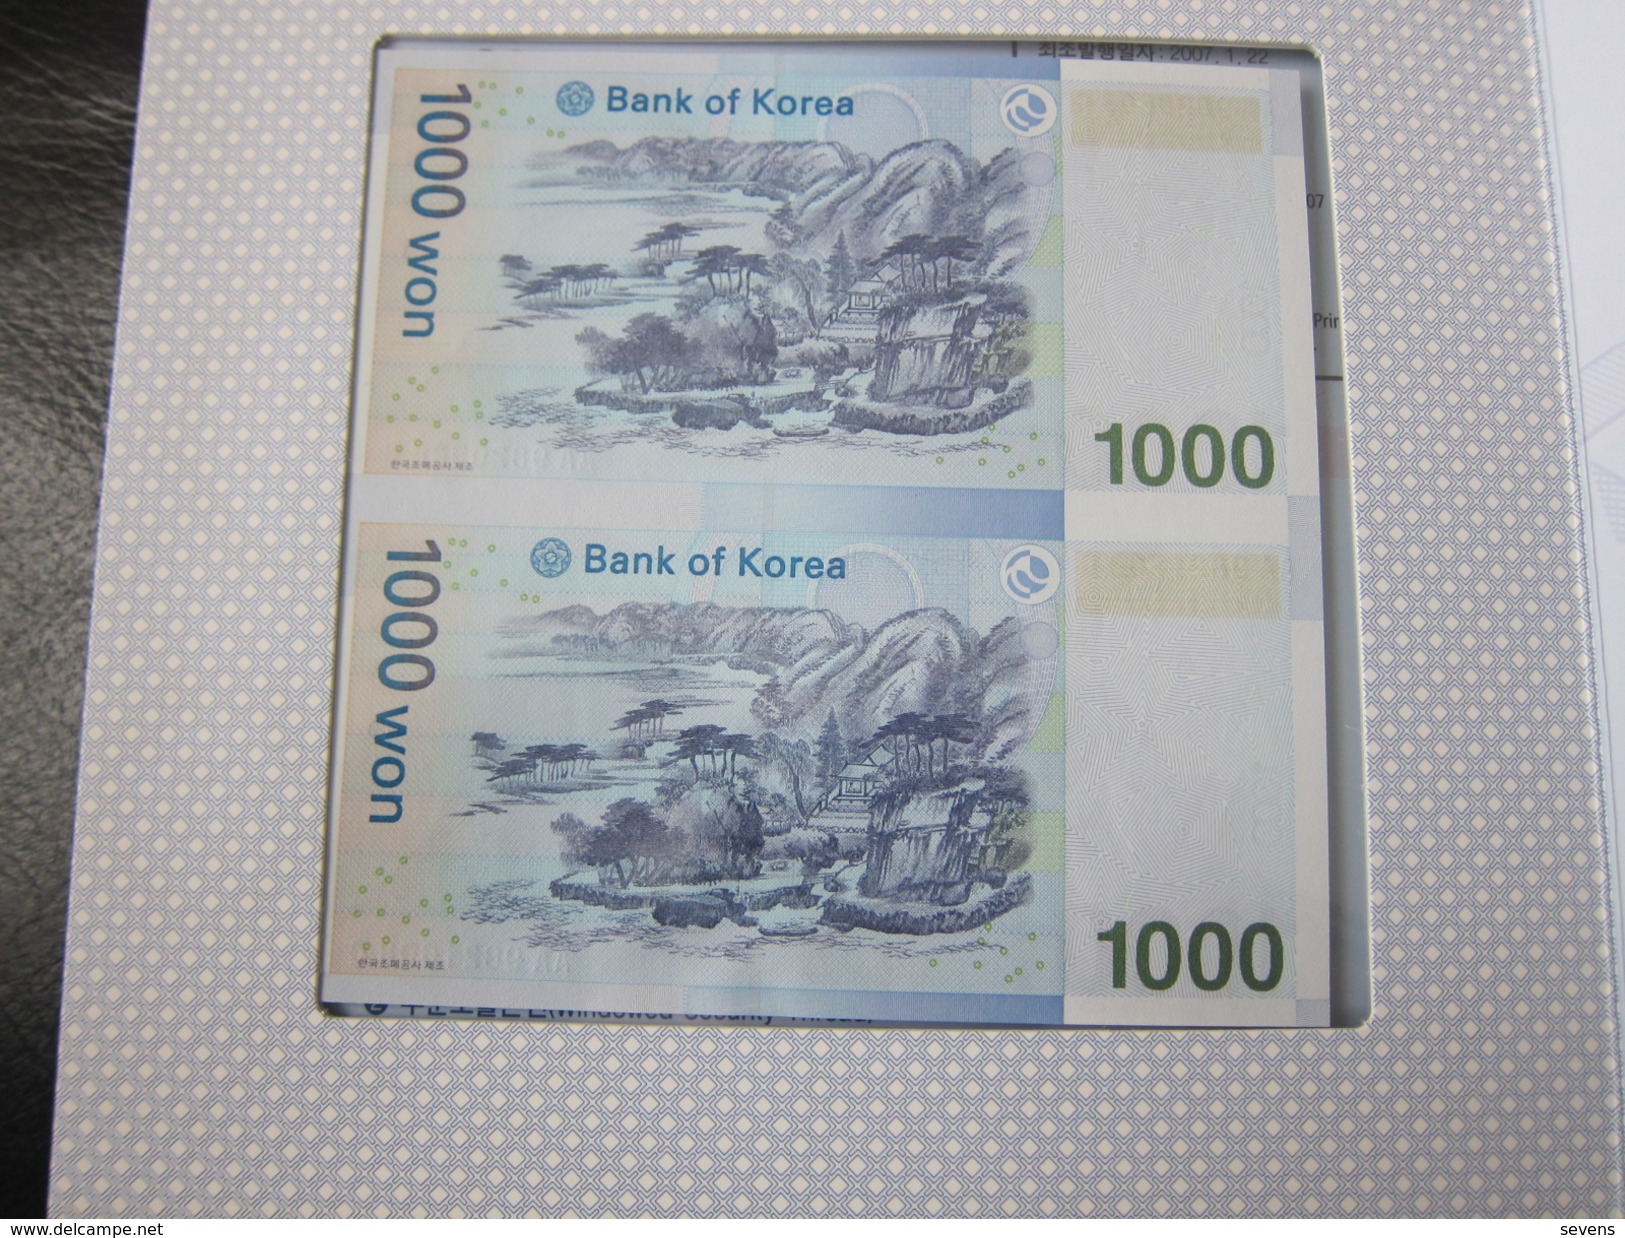 1000 Won Banknote, Uncut Sheet With Two Banknotes,in Folder - Korea, Zuid